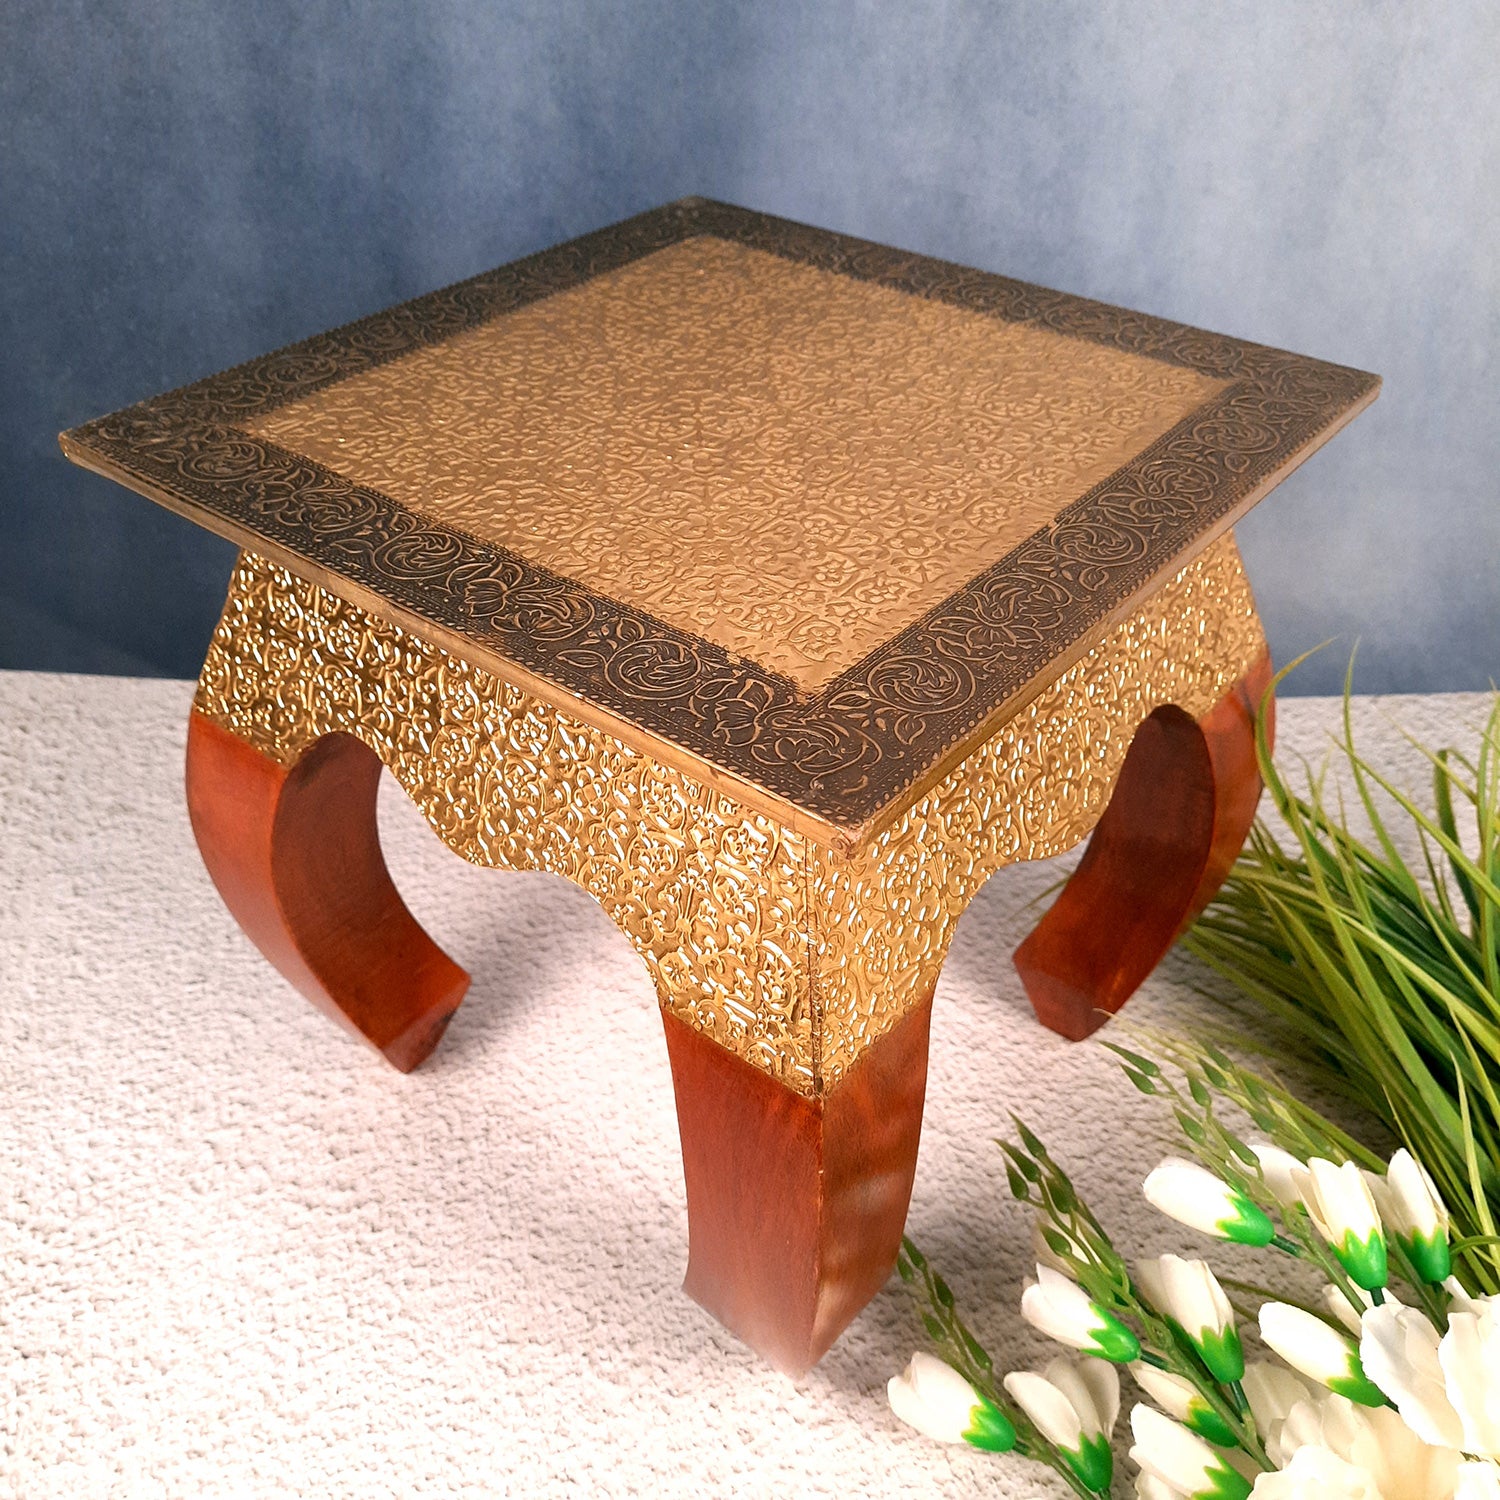 Side Table | Wood & Brass End Tables Cum Stool - for Keeping Lamp, Vases & Plants | Small Stools - for Sitting, Bedside, Home Decor, Corners, Sofa Side Stool, Office & Gifts - 12 Inch - apkamart